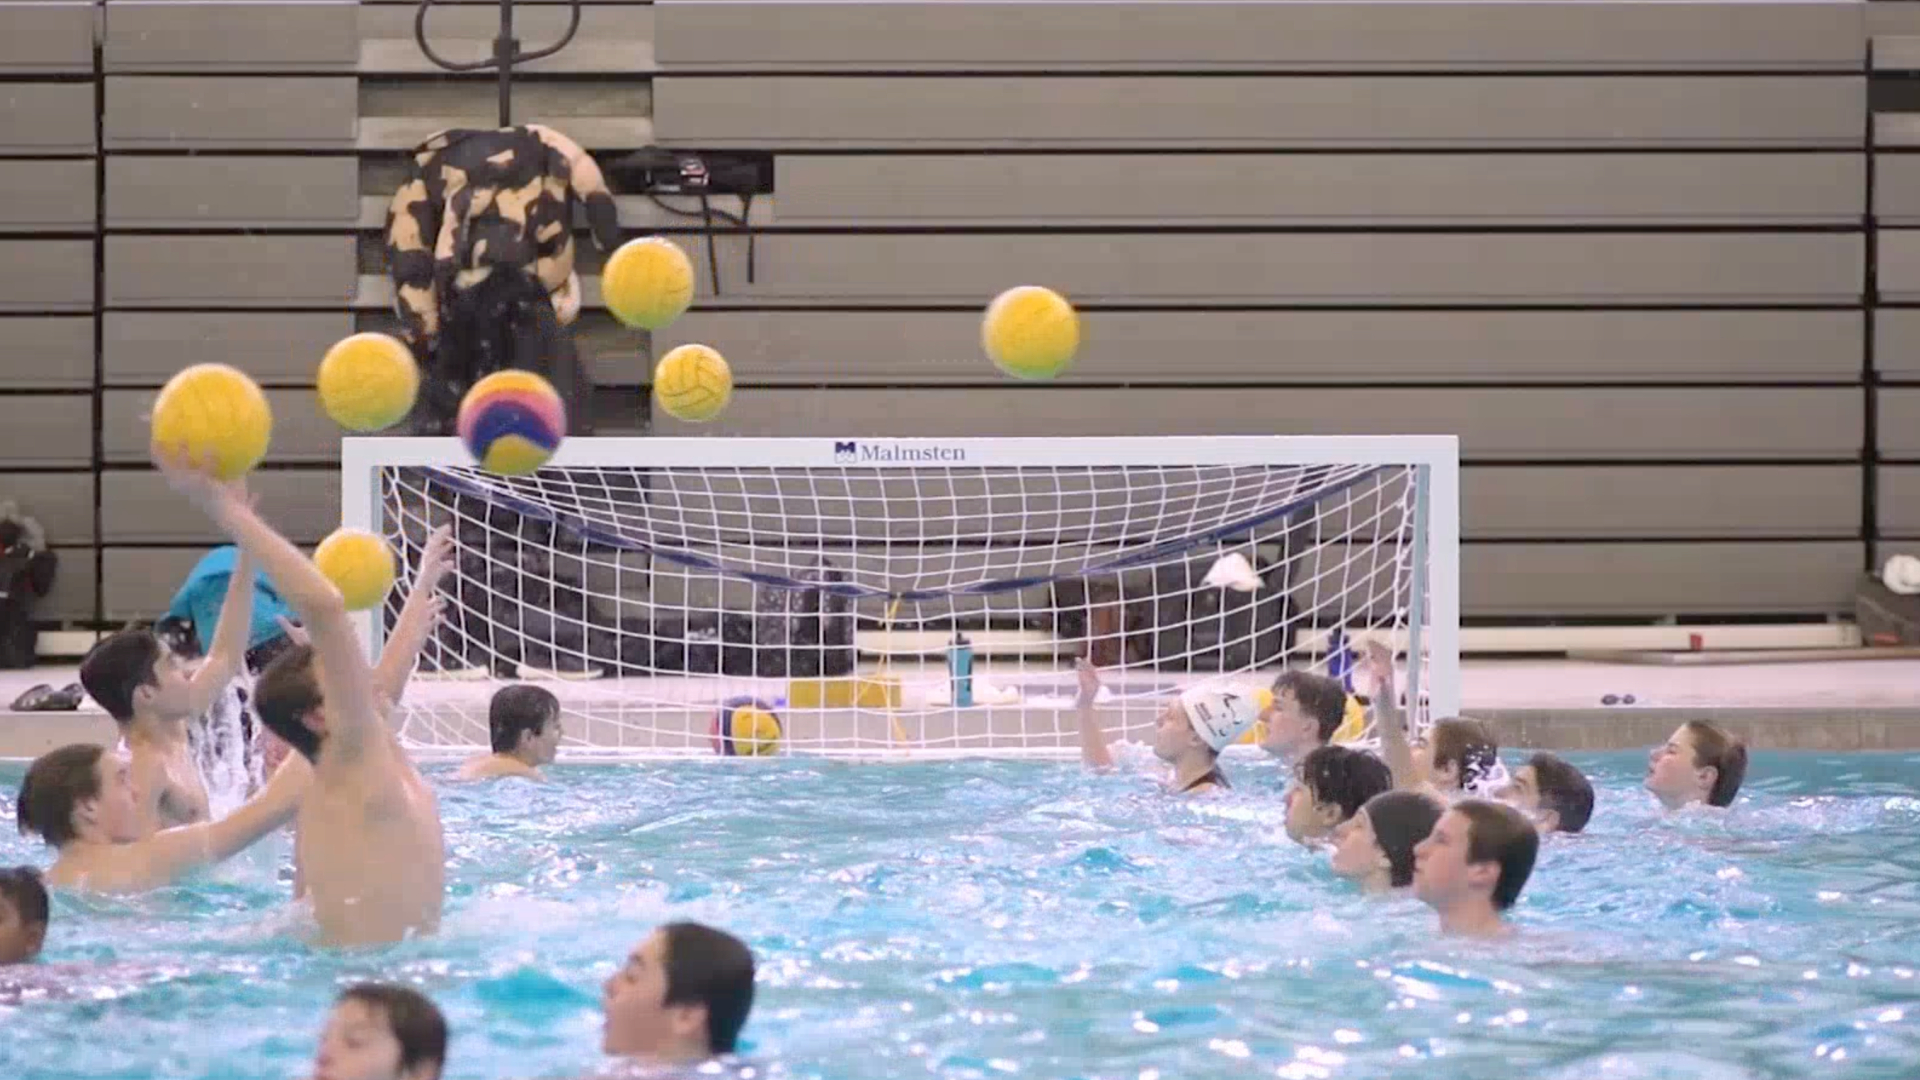 We're learning how to play water polo